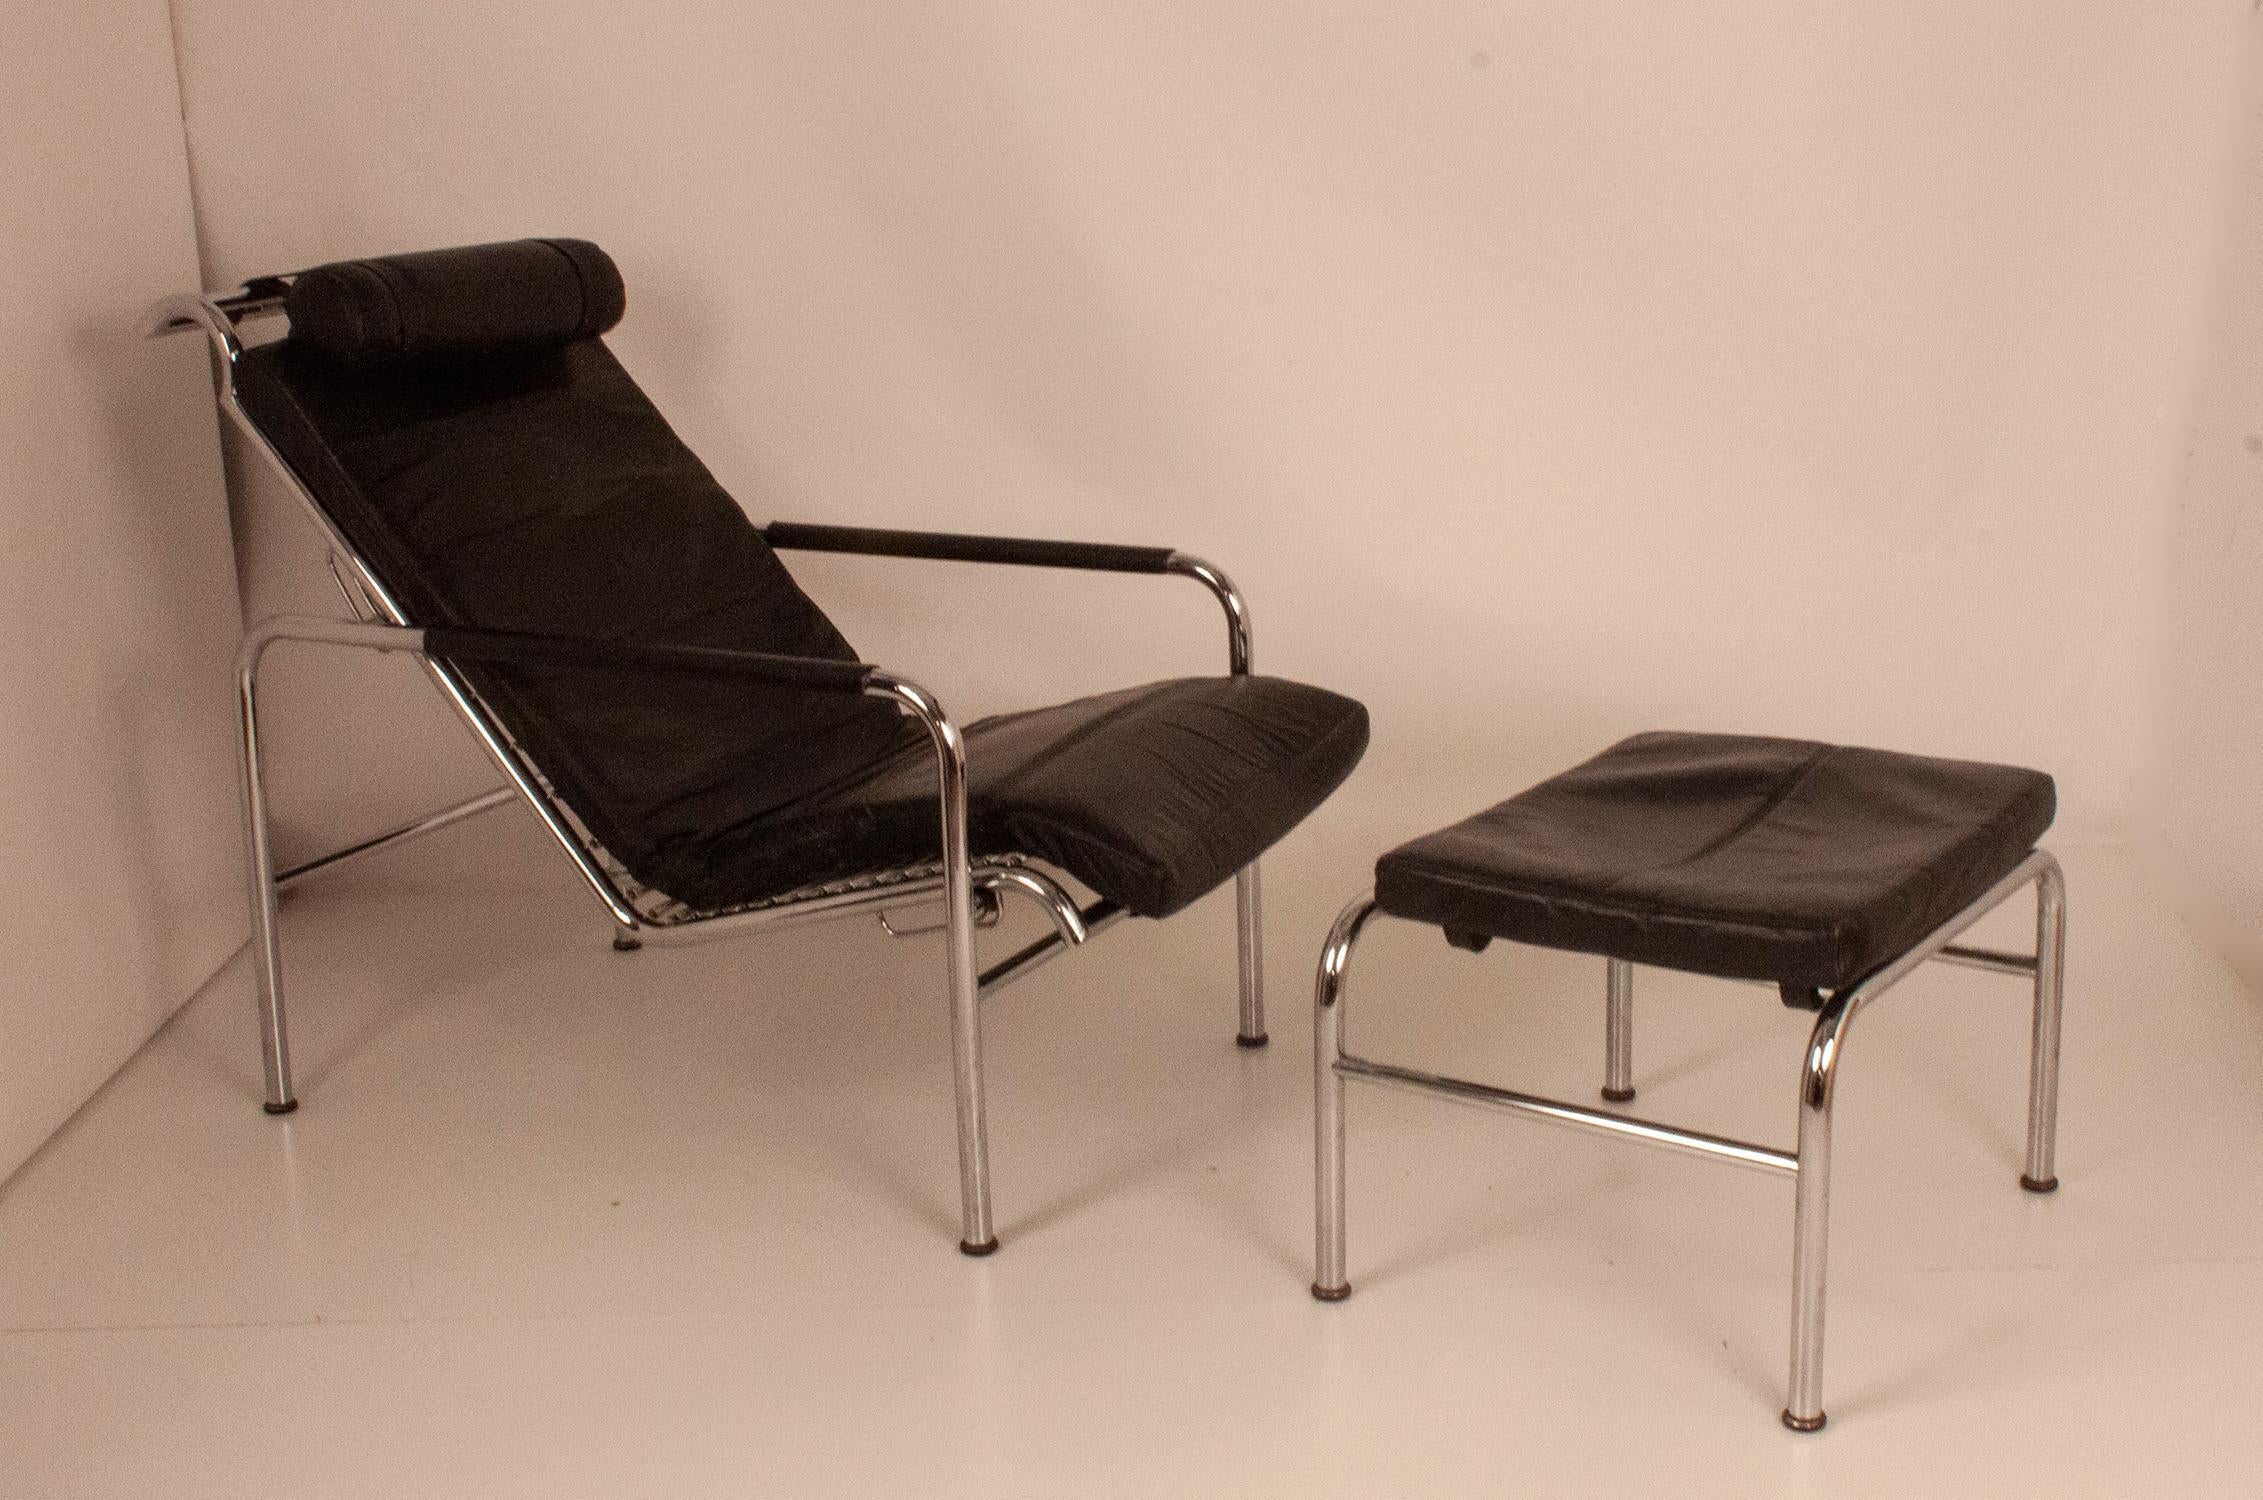 Steel Genni Lounge Chair and Ottoman by Gabriele Mucchi, Italy, 1980s